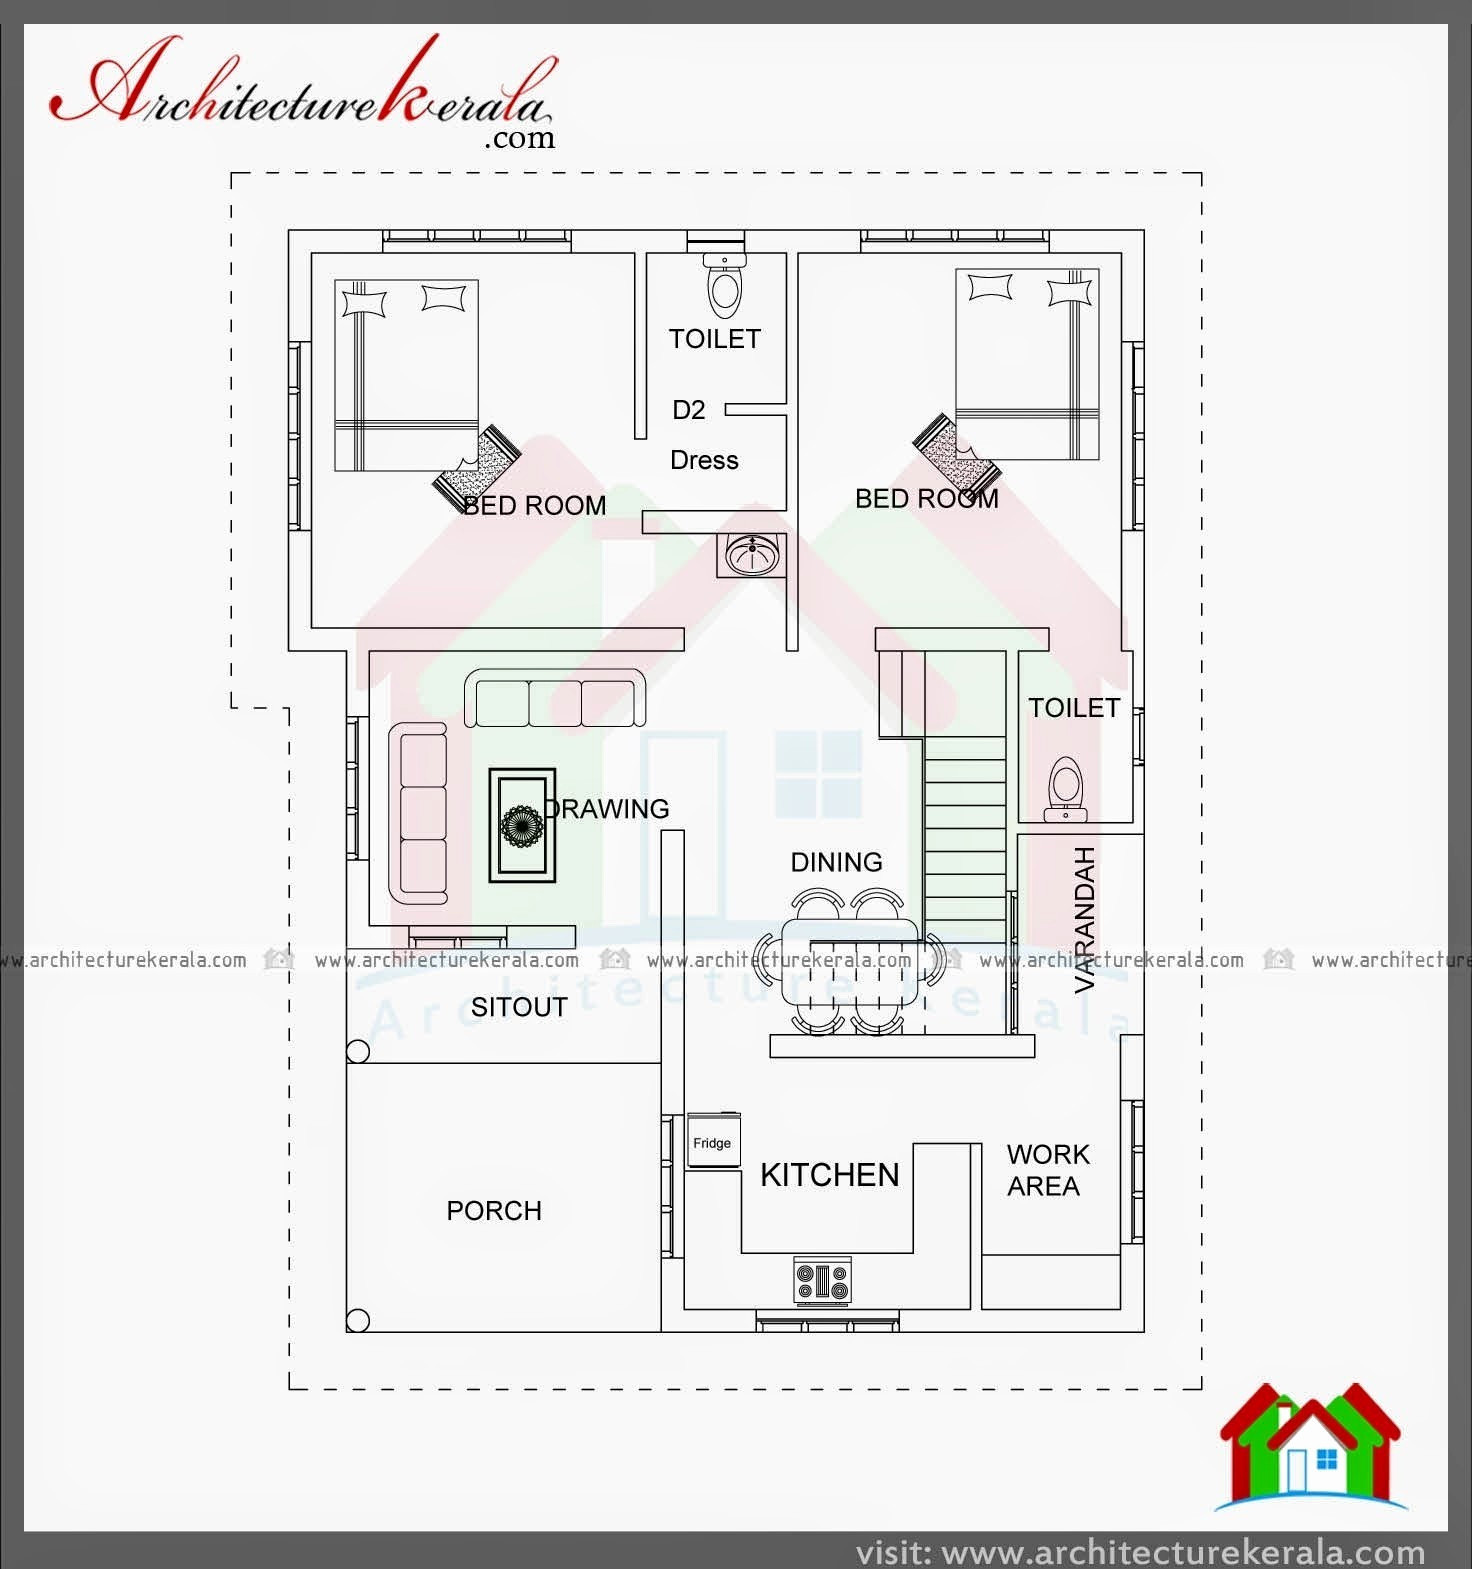 1000 sq ft hardwood floor cost of 1000 square foot home floor plans inspirational 60 awesome gallery within 1000 square foot home floor plans inspirational 60 awesome gallery kerala home floor plans